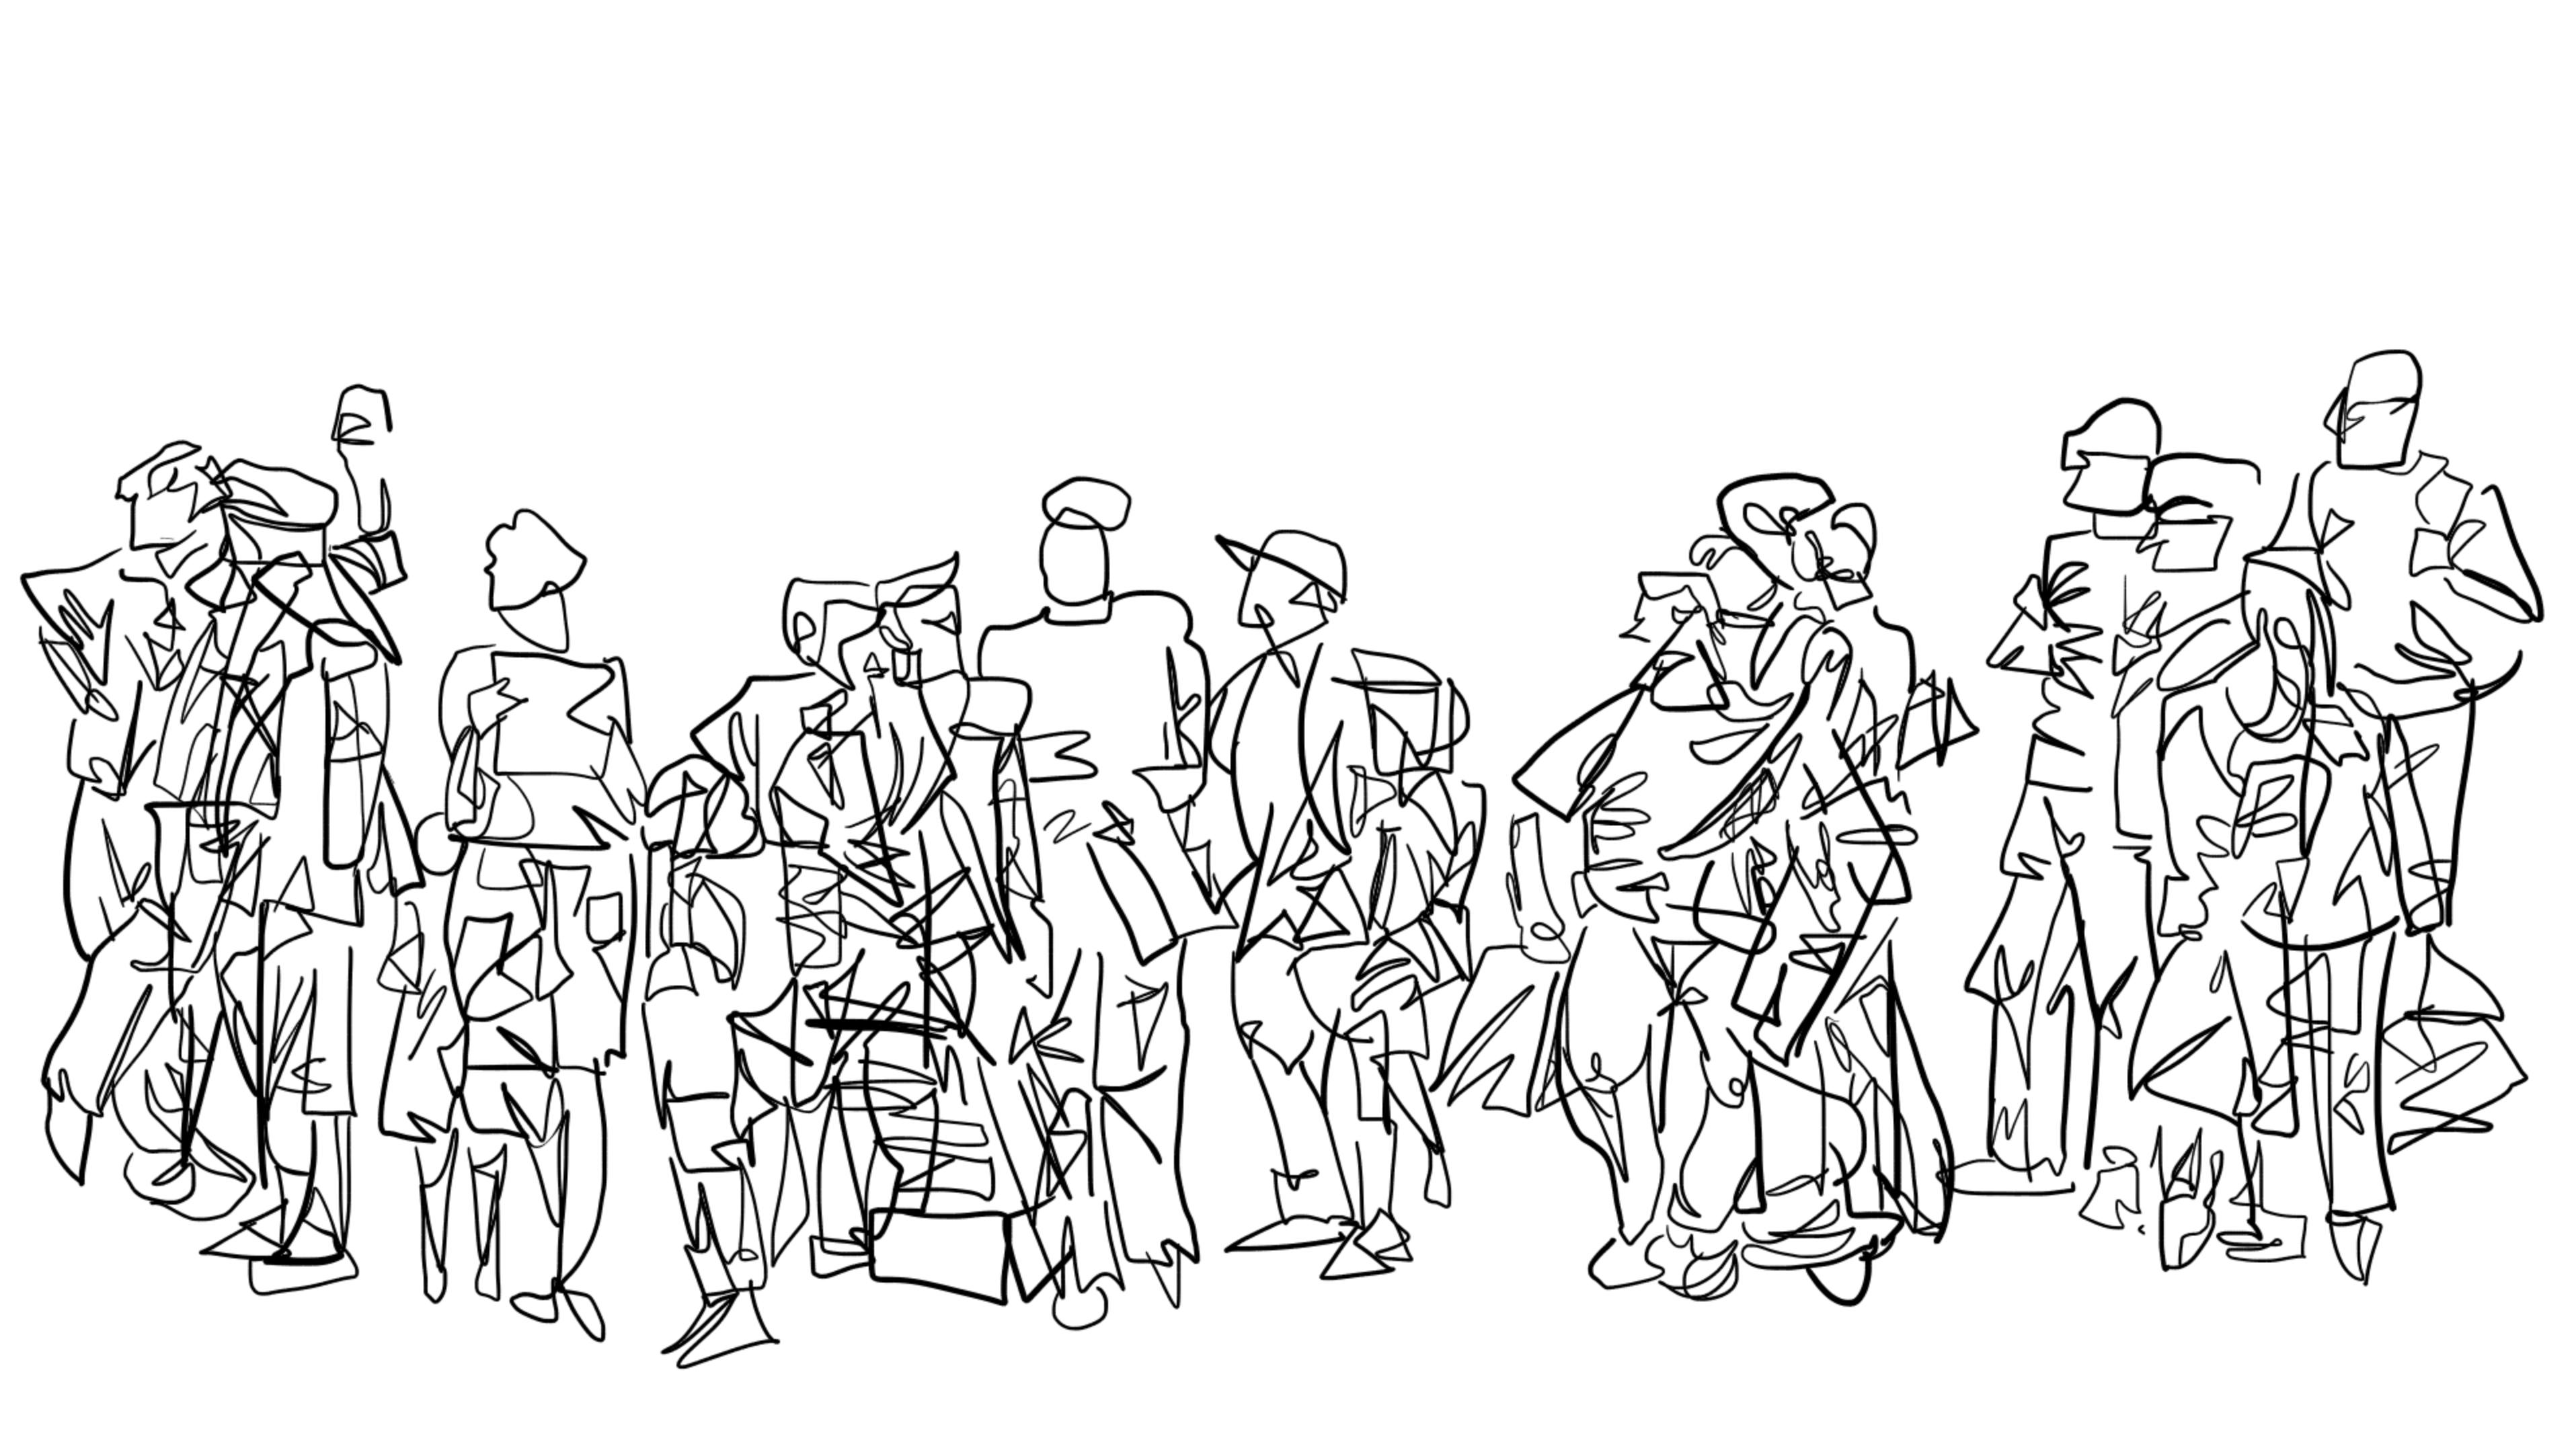 Interconnected continuous-line drawings of a crowd of people